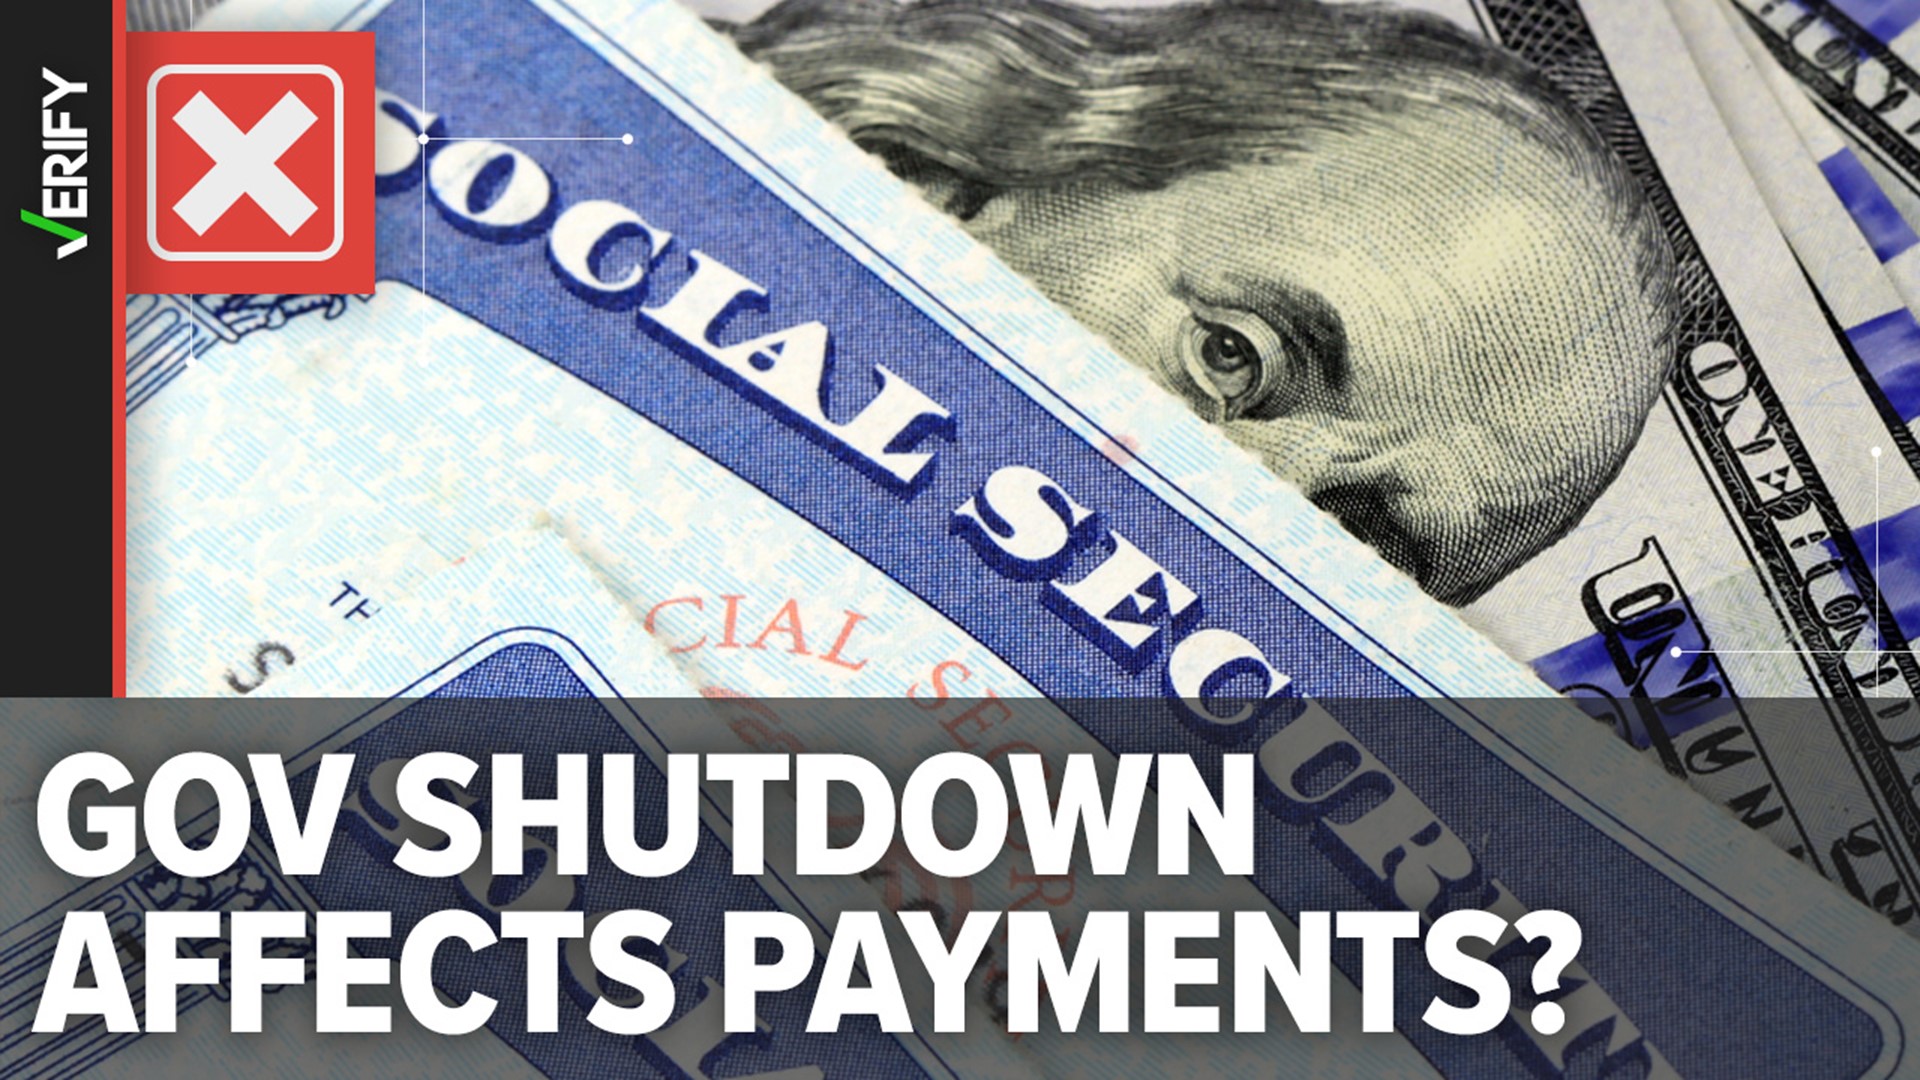 Several VERIFY readers asked if they’ll still receive their Social Security checks in the event of a government shutdown. Here’s what we found.